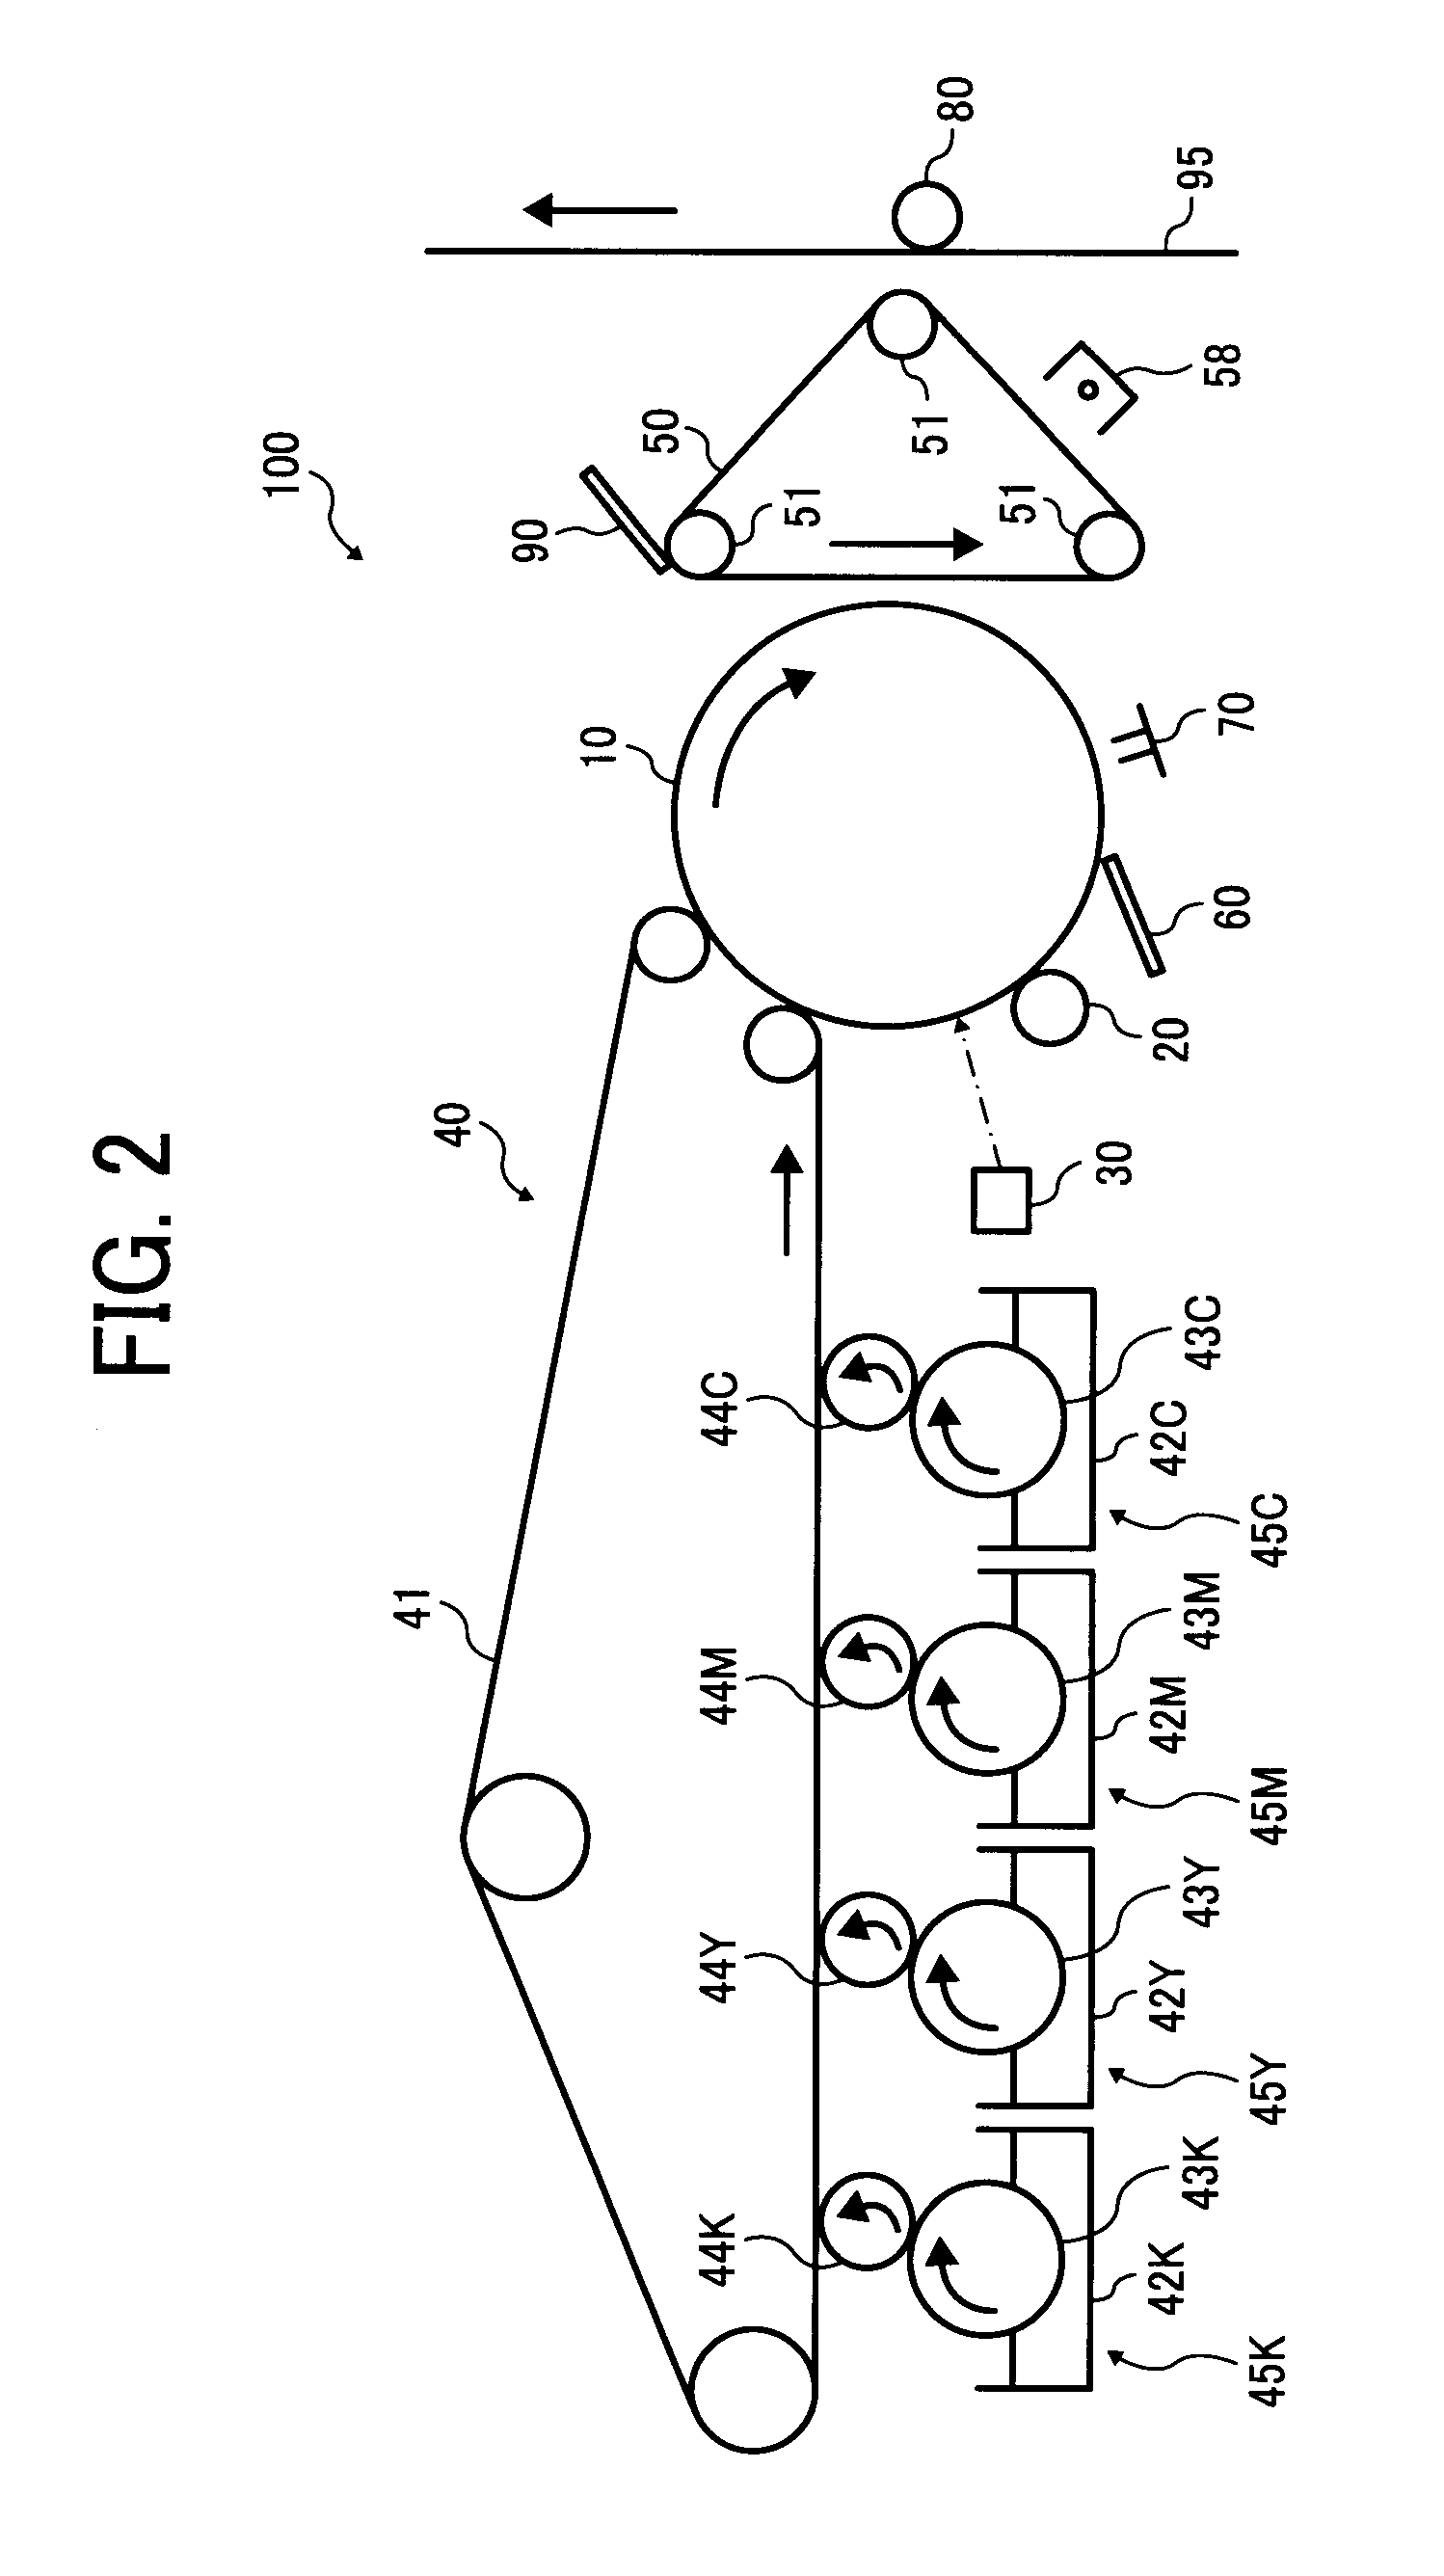 Toner for developing electrostatic latent image, and image forming apparatus and process cartridge using the toner